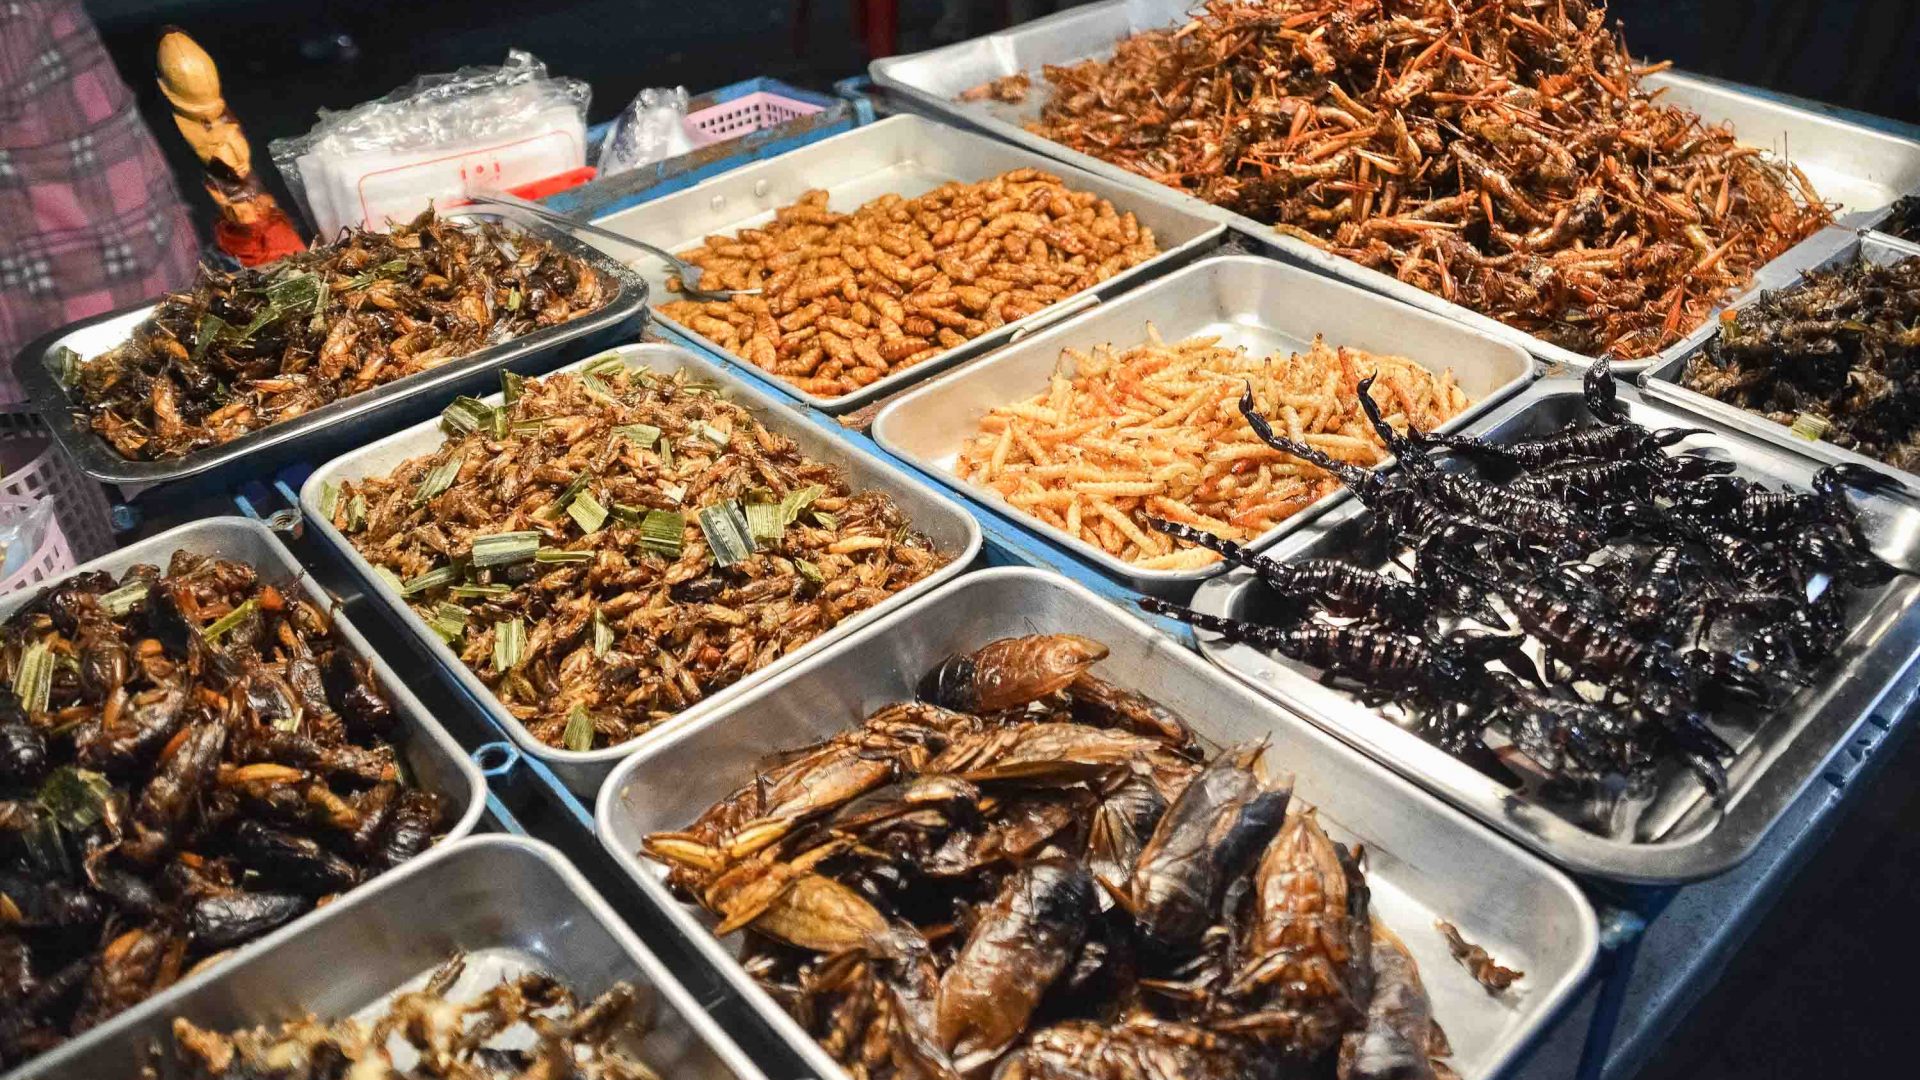 Trays of varying insect dishes.